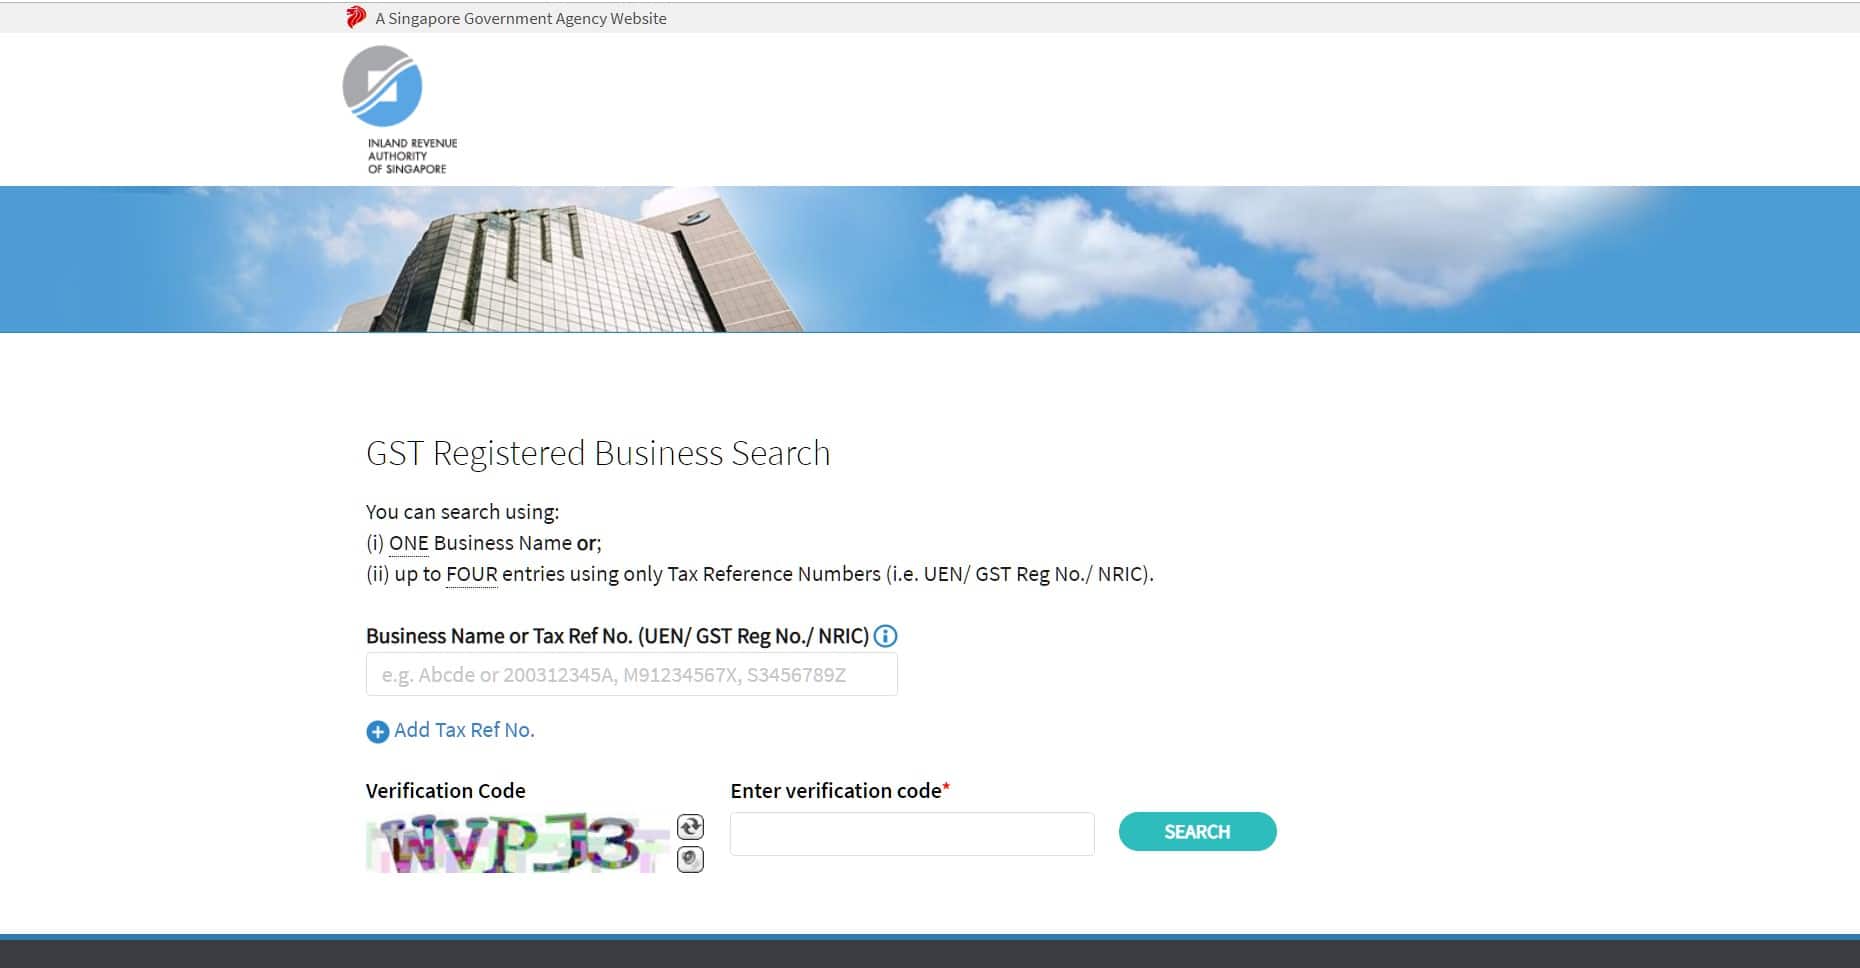 screenshot of the online tool to check gst registration for singapore businesses and companies on the iras website